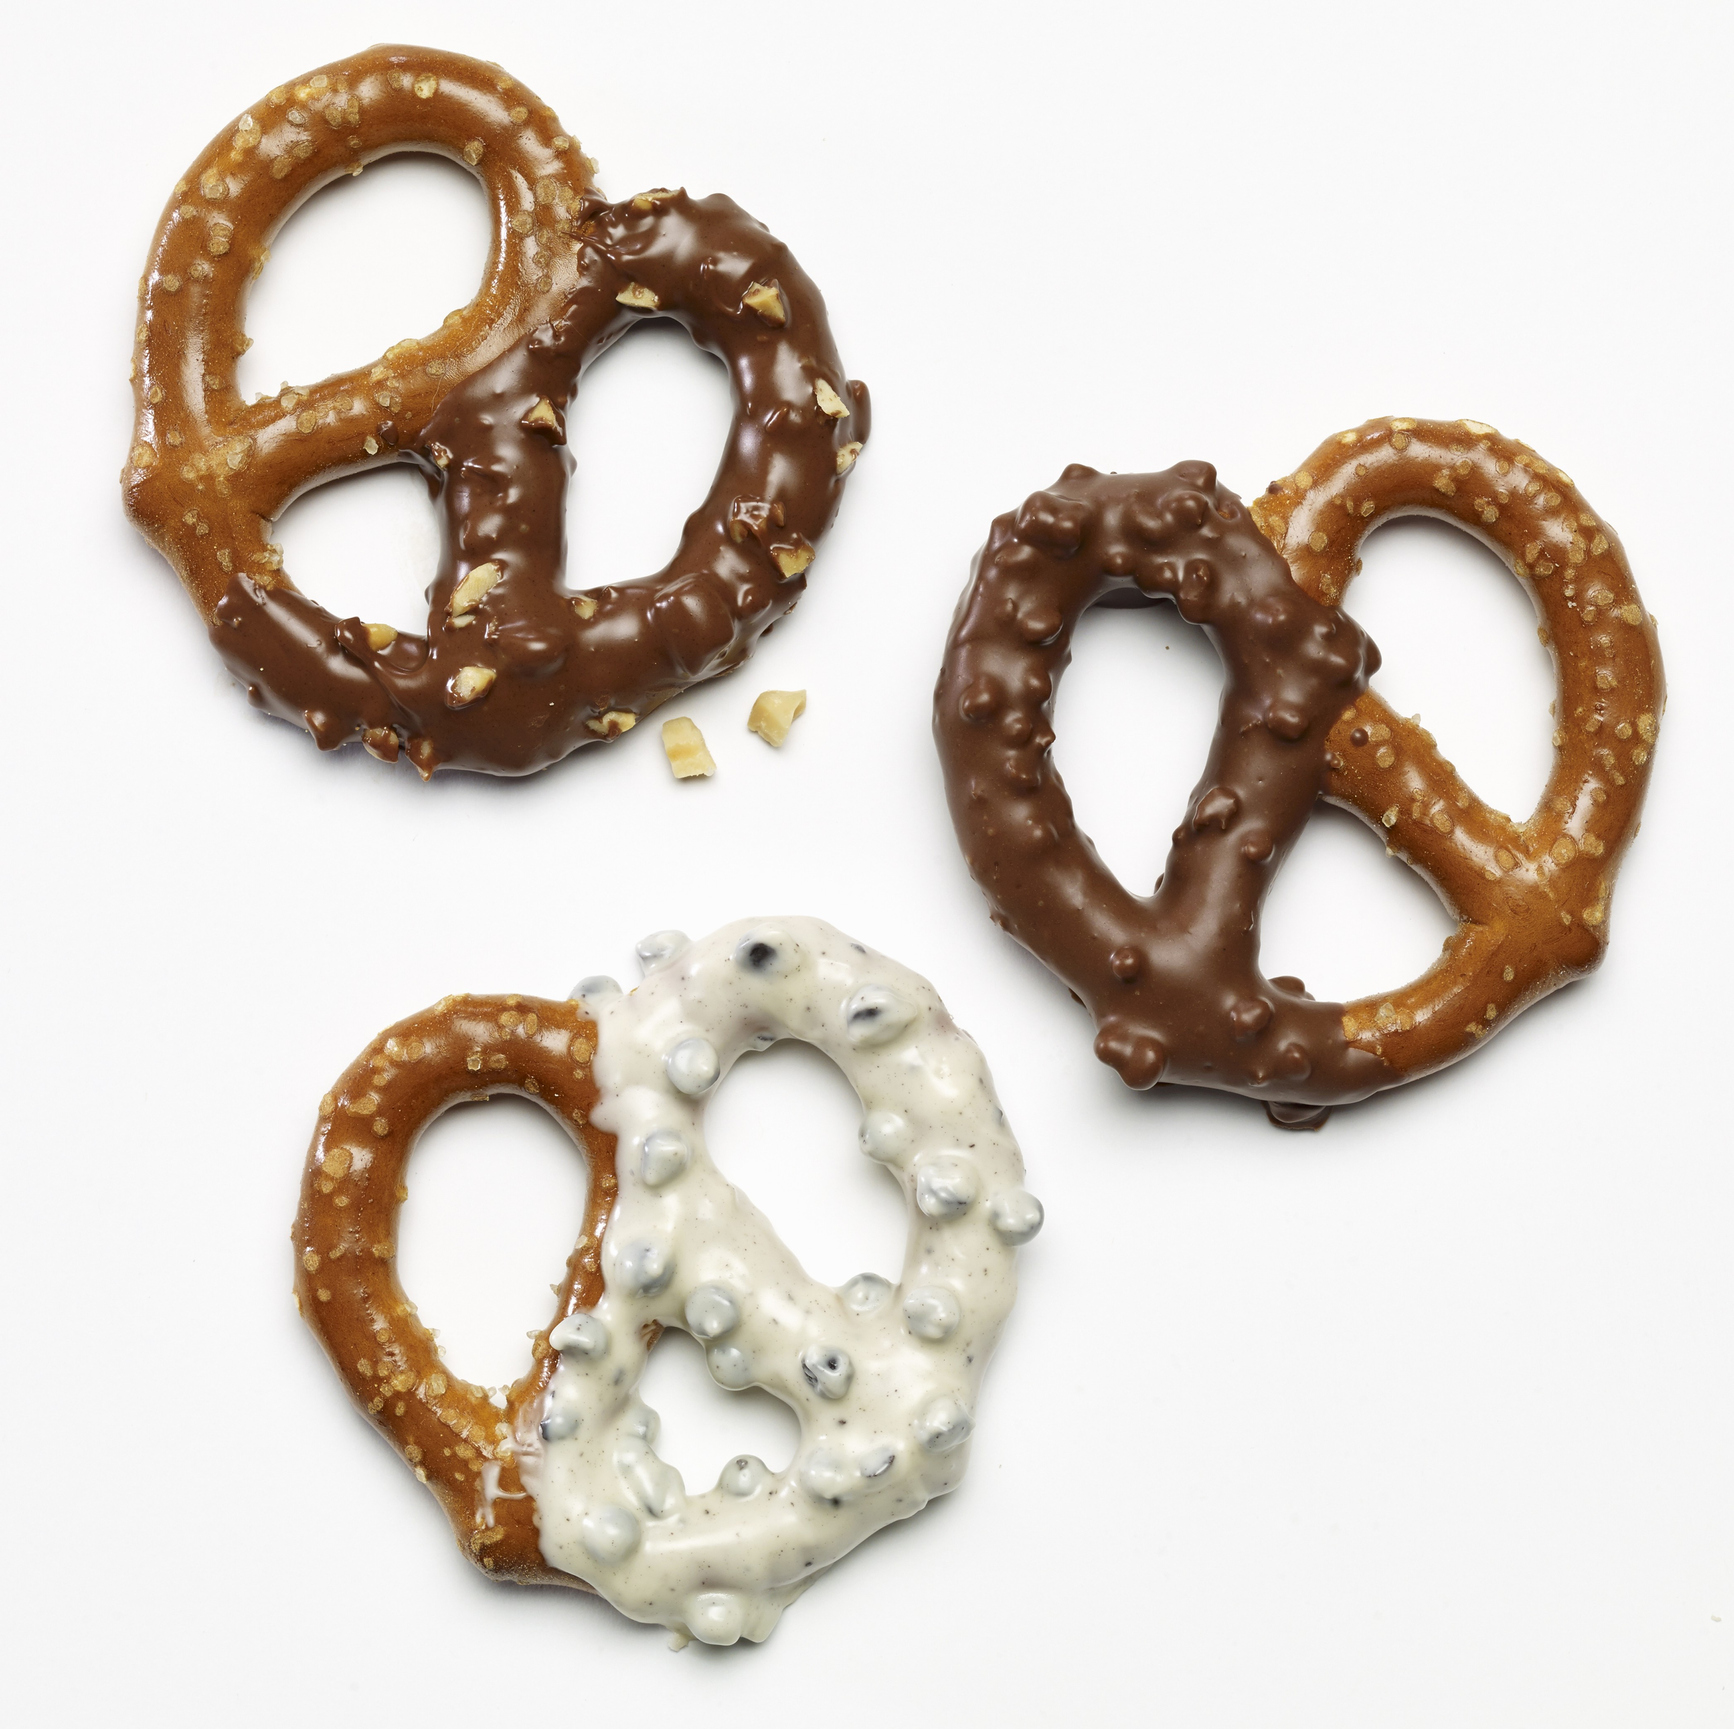 Three pretzels dipped in white and dark chocolate